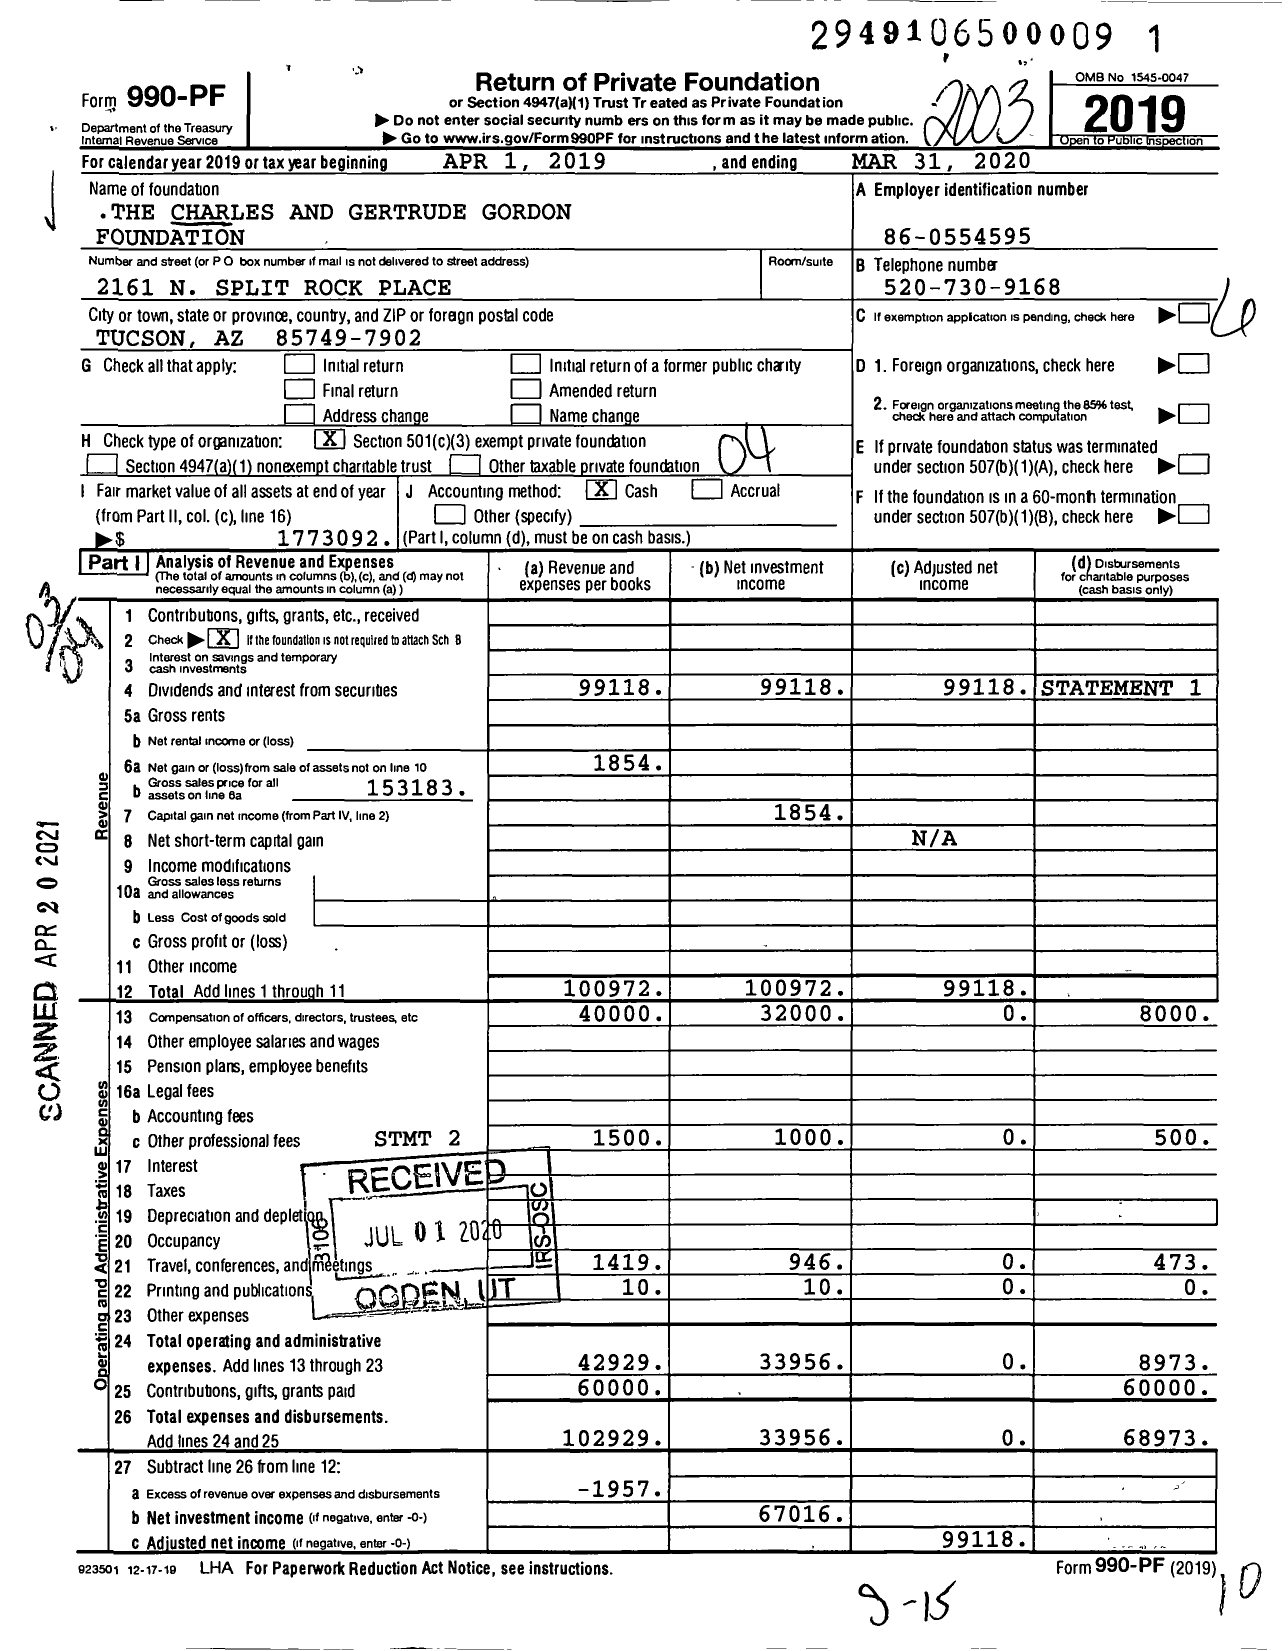 Image of first page of 2019 Form 990PF for The Charles and Gertrude Gordon Foundation